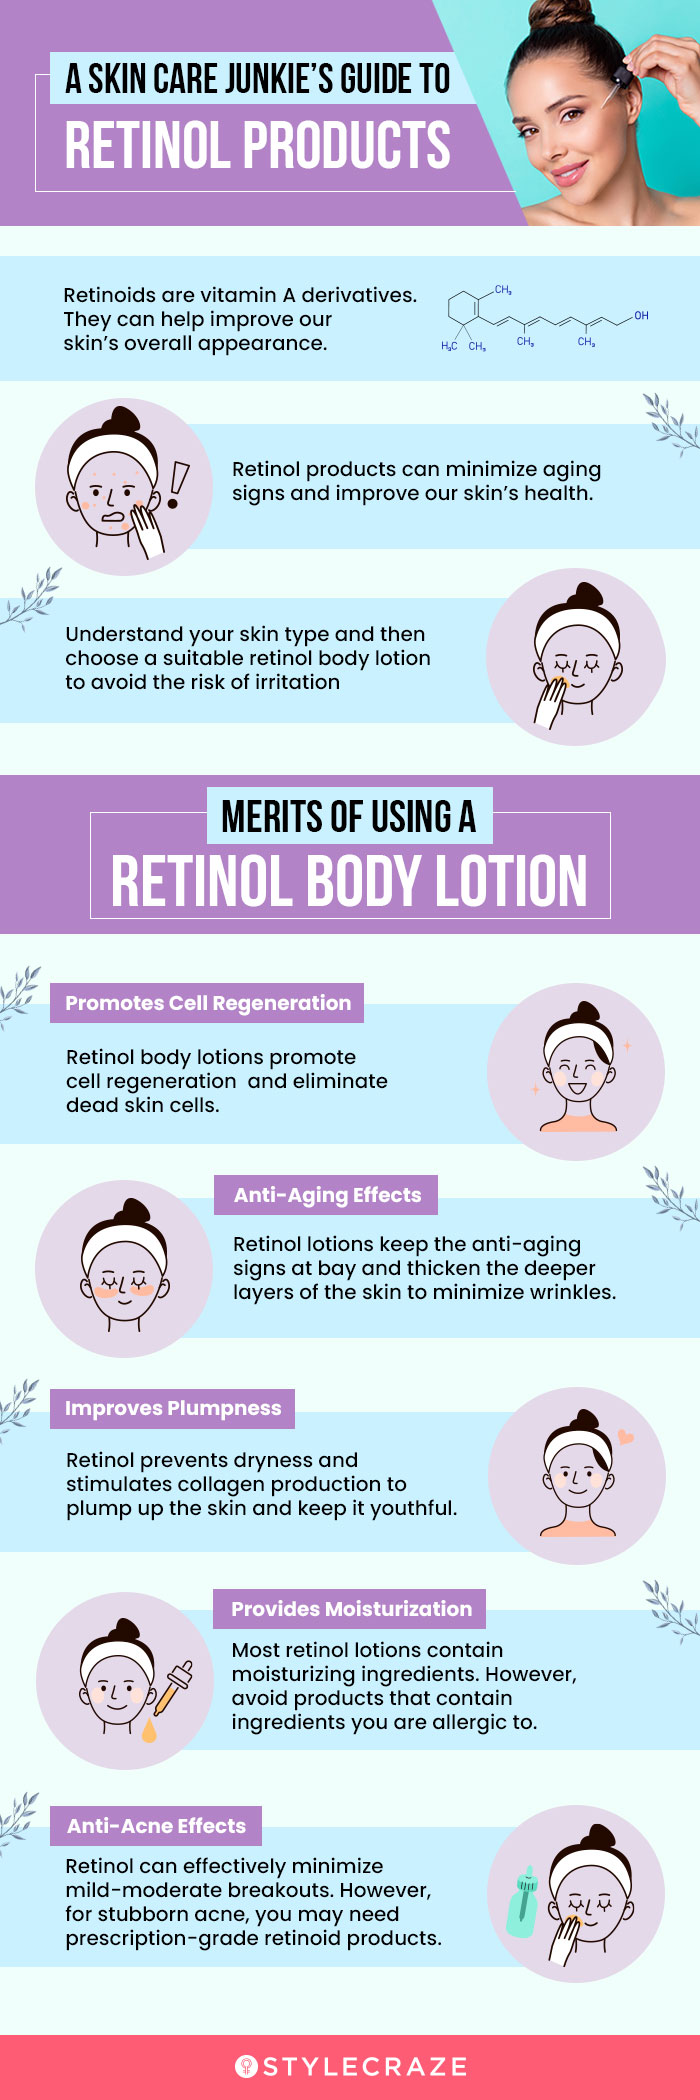 A-Skin-Care-Junkie’s-Guide-To-Retinol-Products